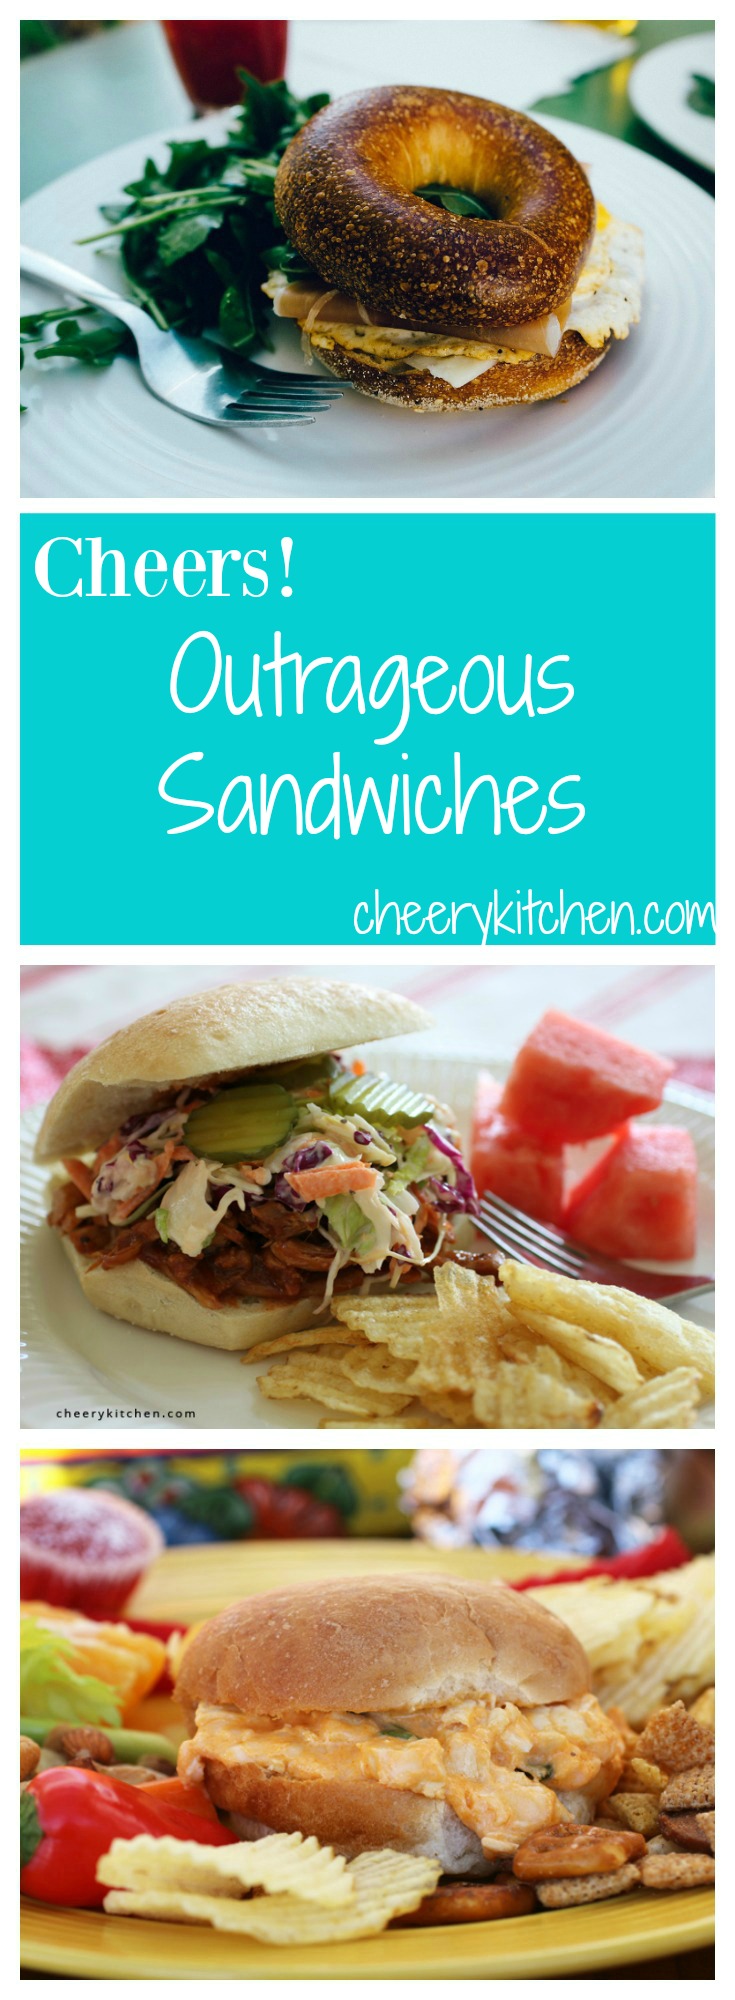 Sandwiches are not just bread and meat anymore! Check out the most outrageous sandwiches around the web including my personal favorite!